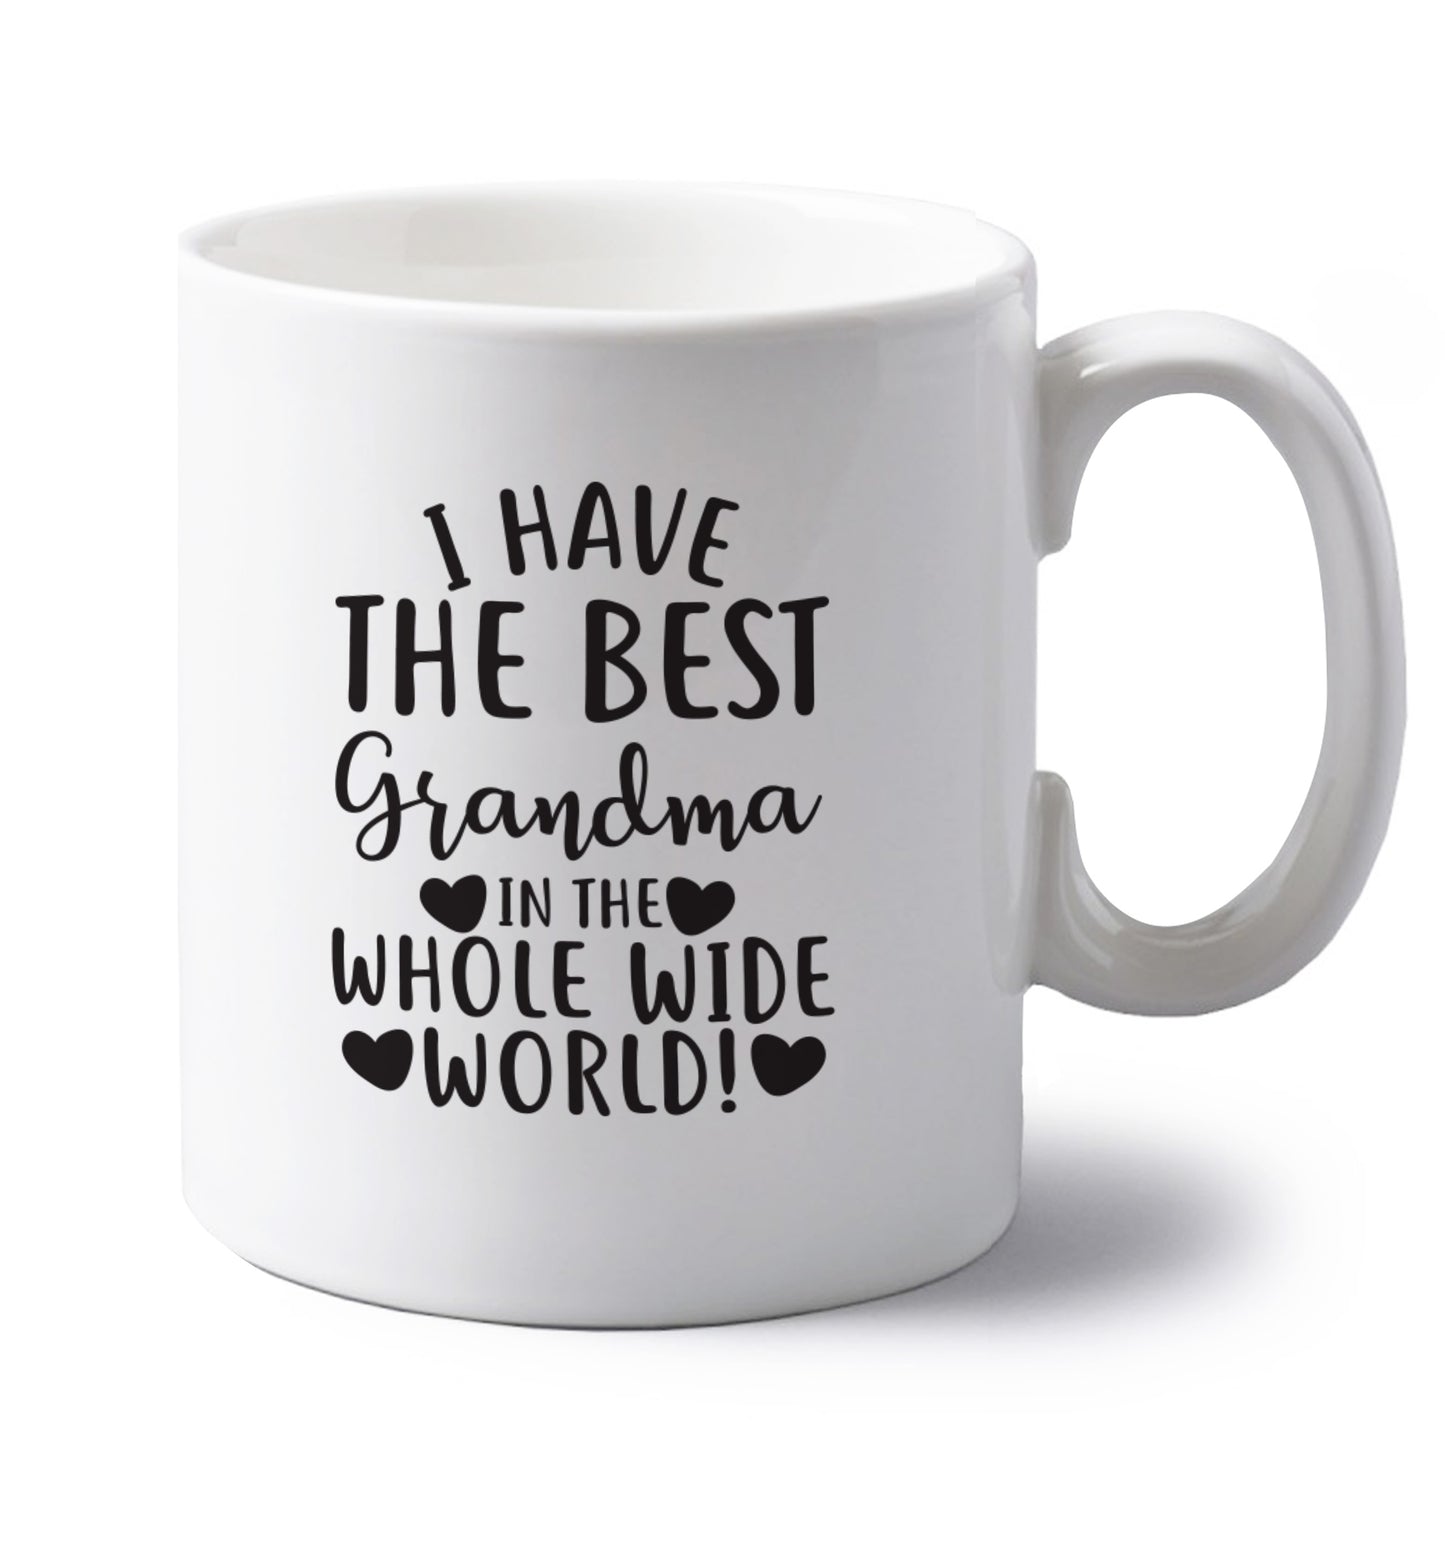 I have the best nana in the whole wide world! left handed white ceramic mug 